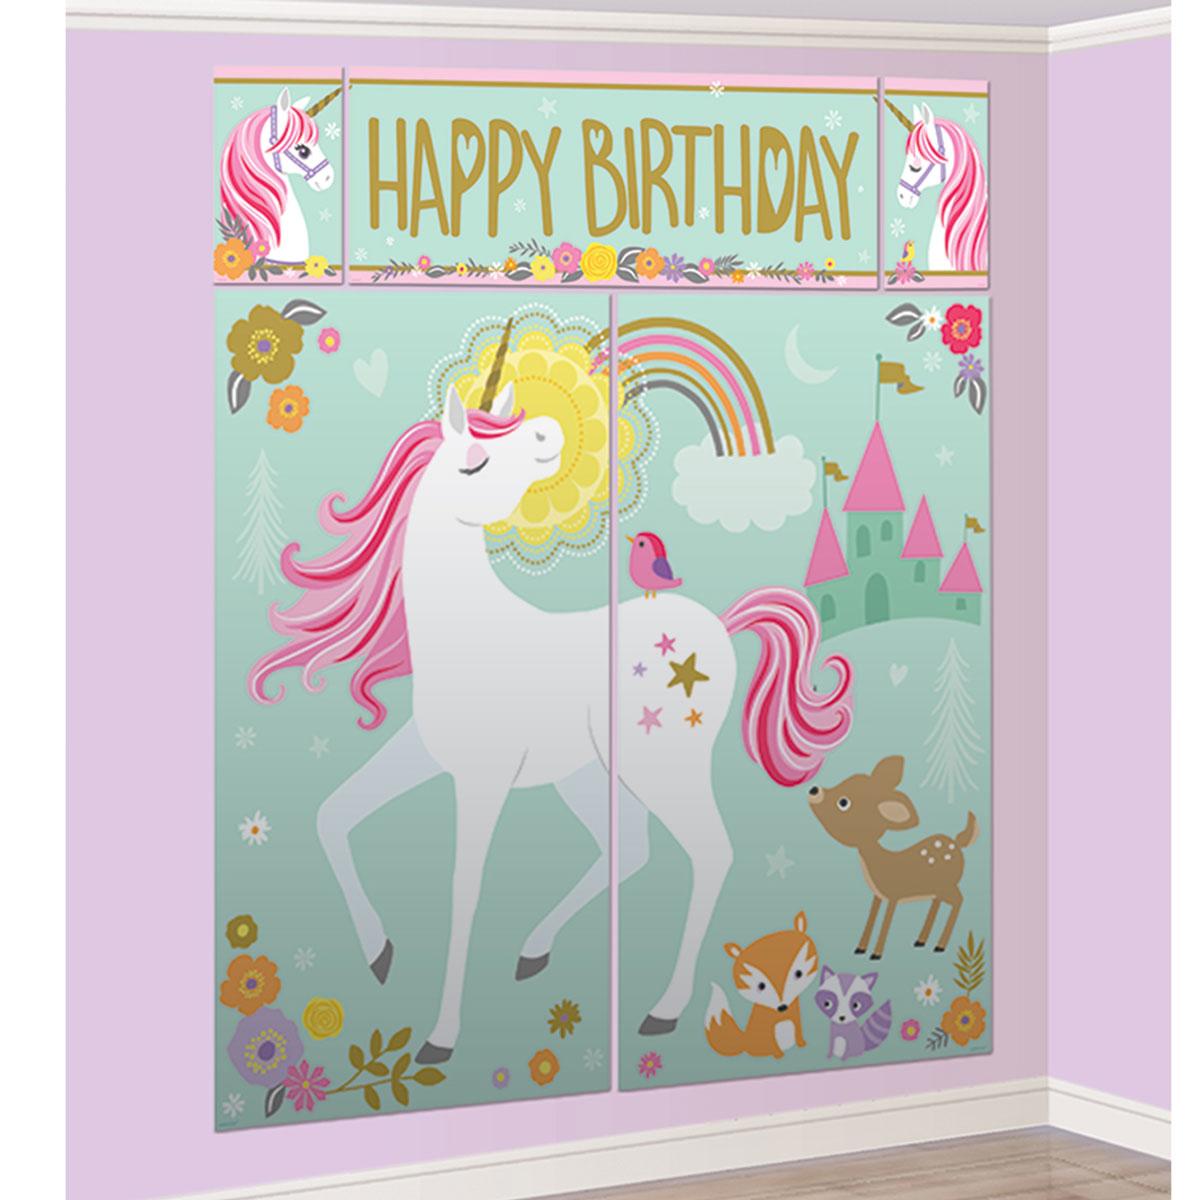 Magical Unicorn Wall Decoration Kit with Photo Props by Amscan 670735 available here at Karnival Costumes online party shop